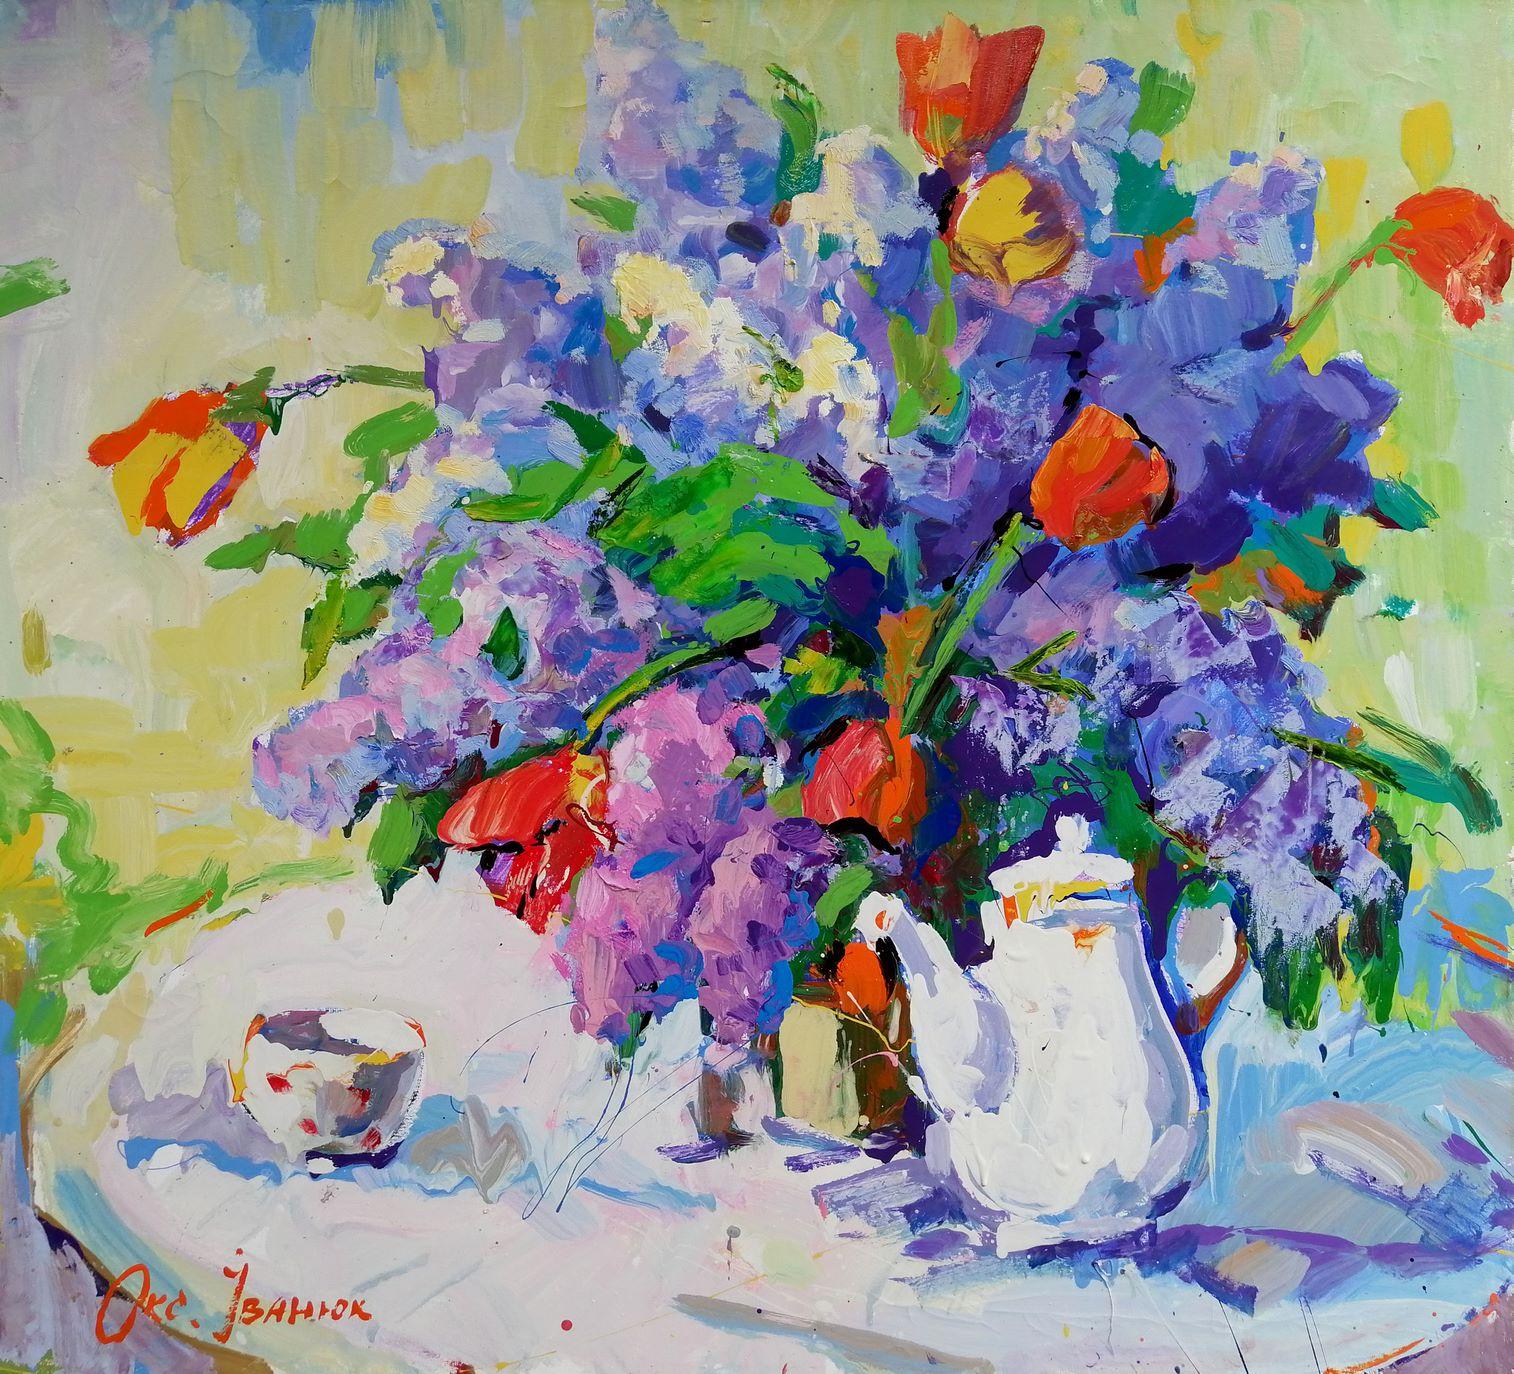 Bouquet of Flowers, Still Life Impressionism Original oil Painting Ready to Hang